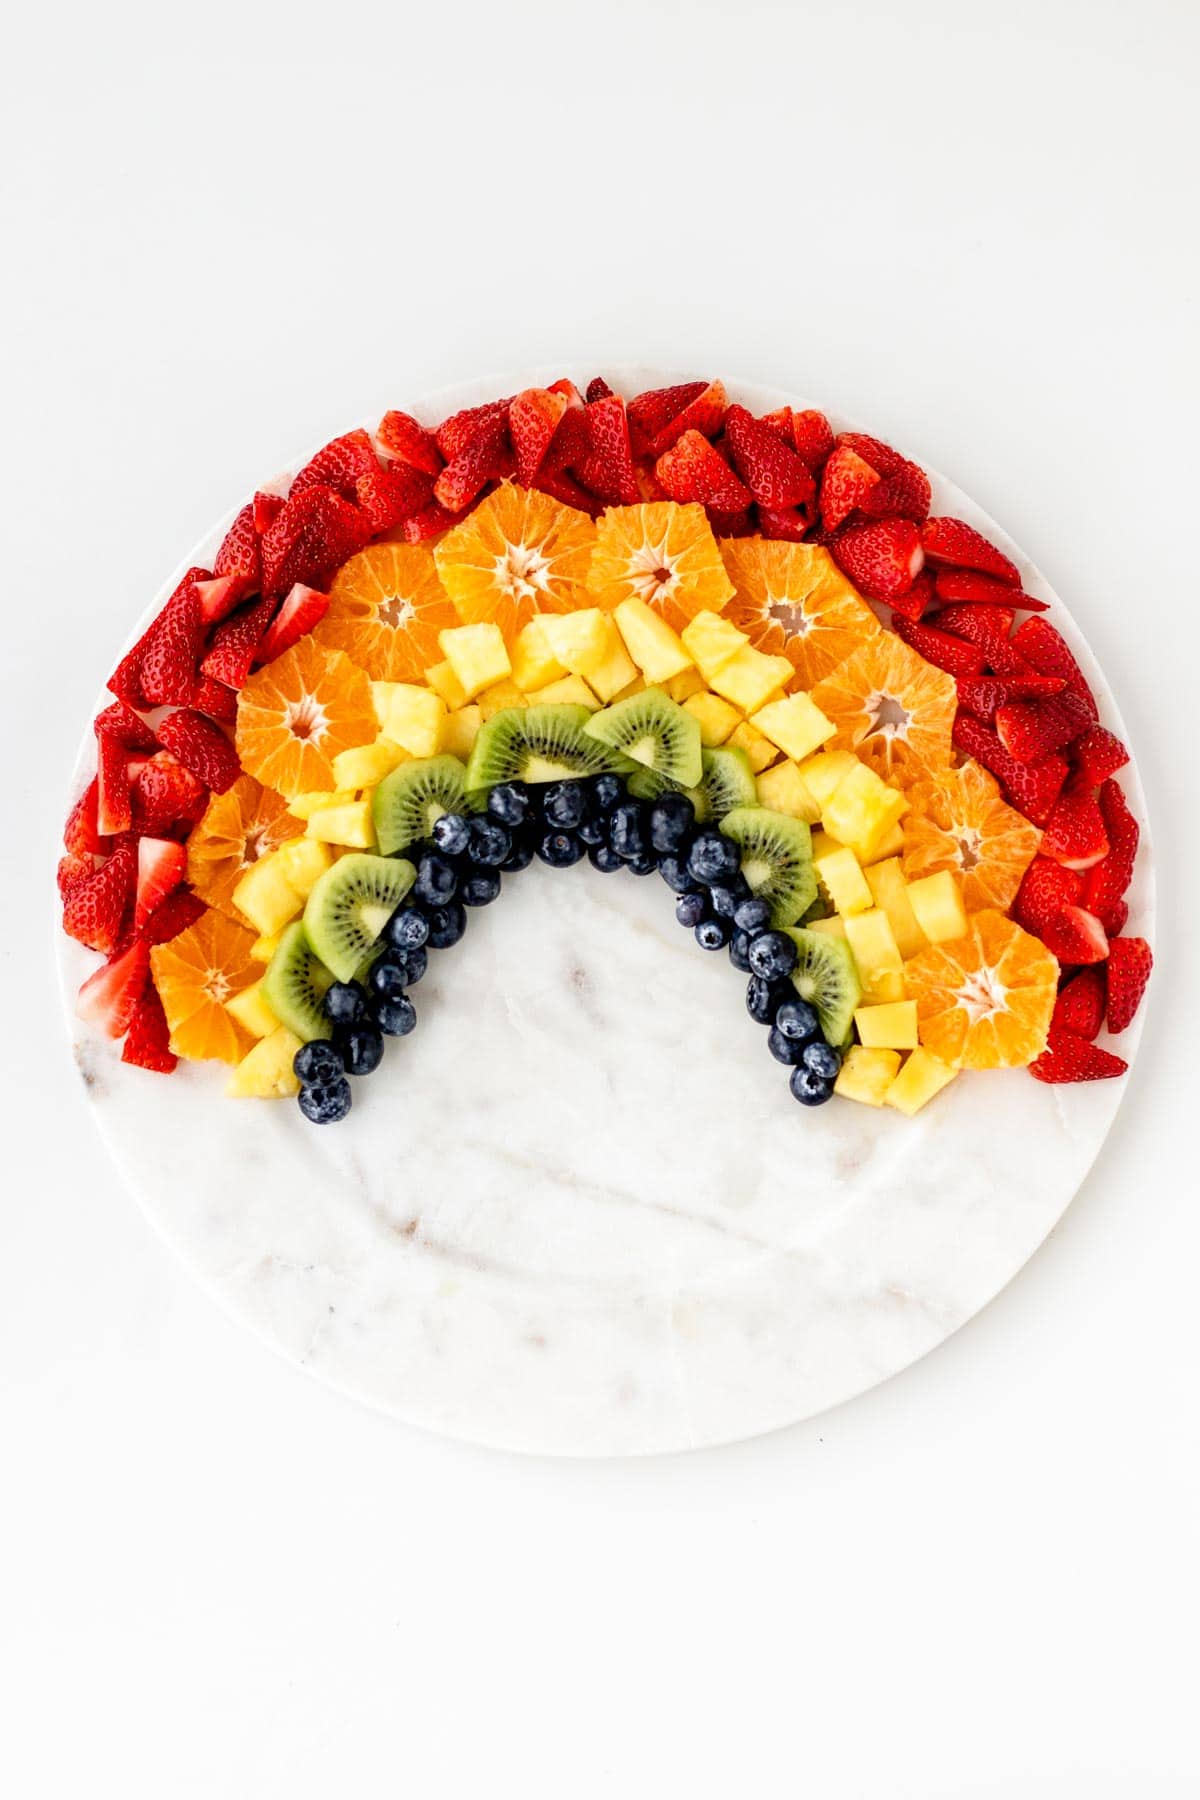 Strawberries, oranges, pineapple, kiwi, and blueberries arranged into the shape of a rainbow.